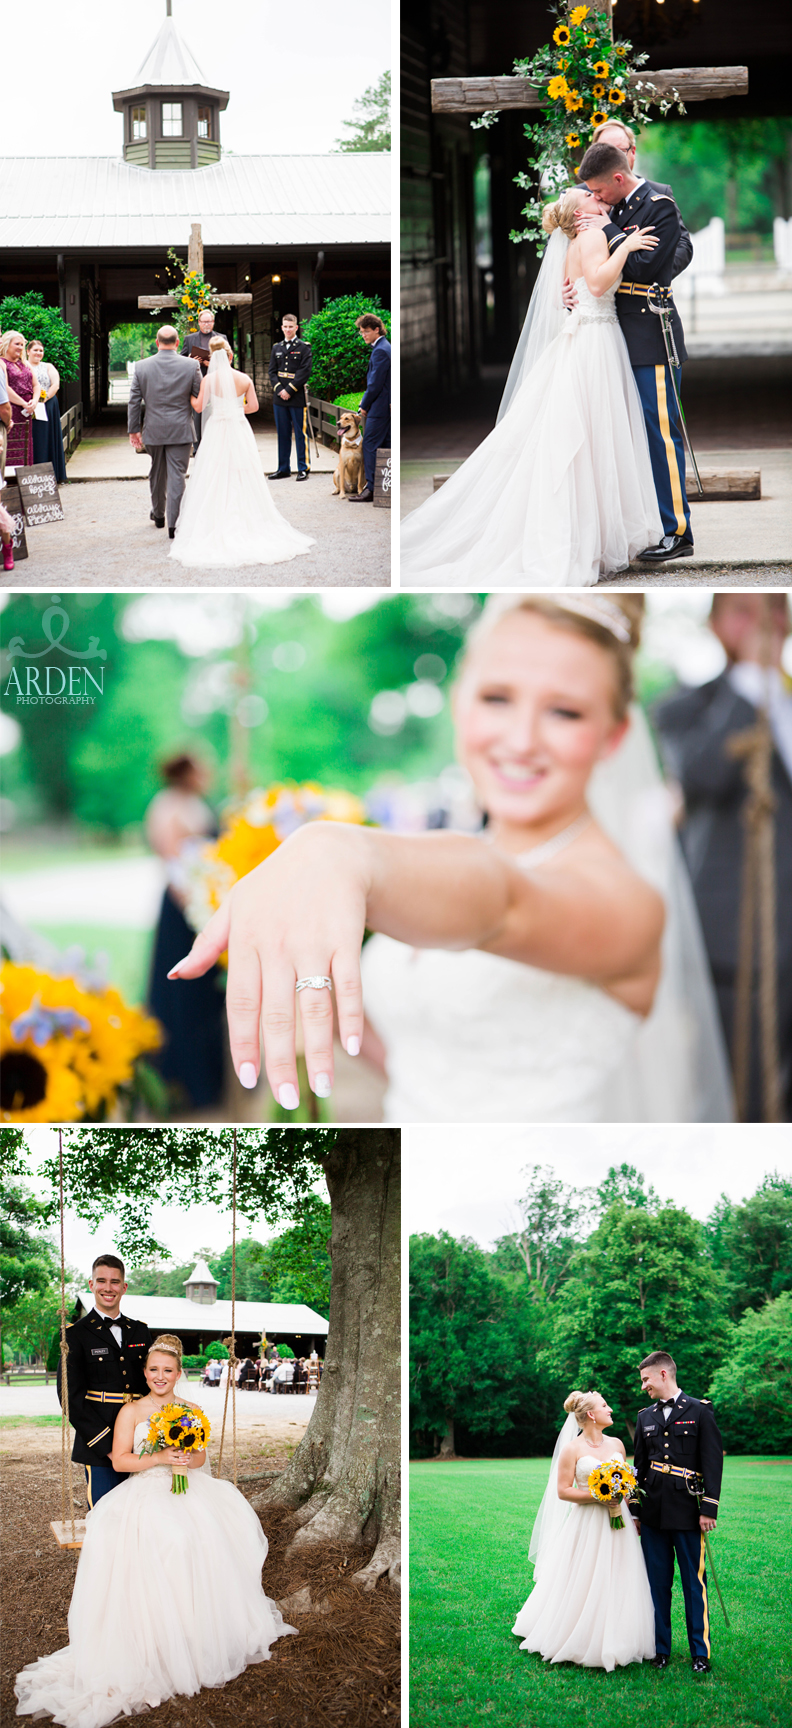  Sunflowers added a pop of color to this summer wedding! 